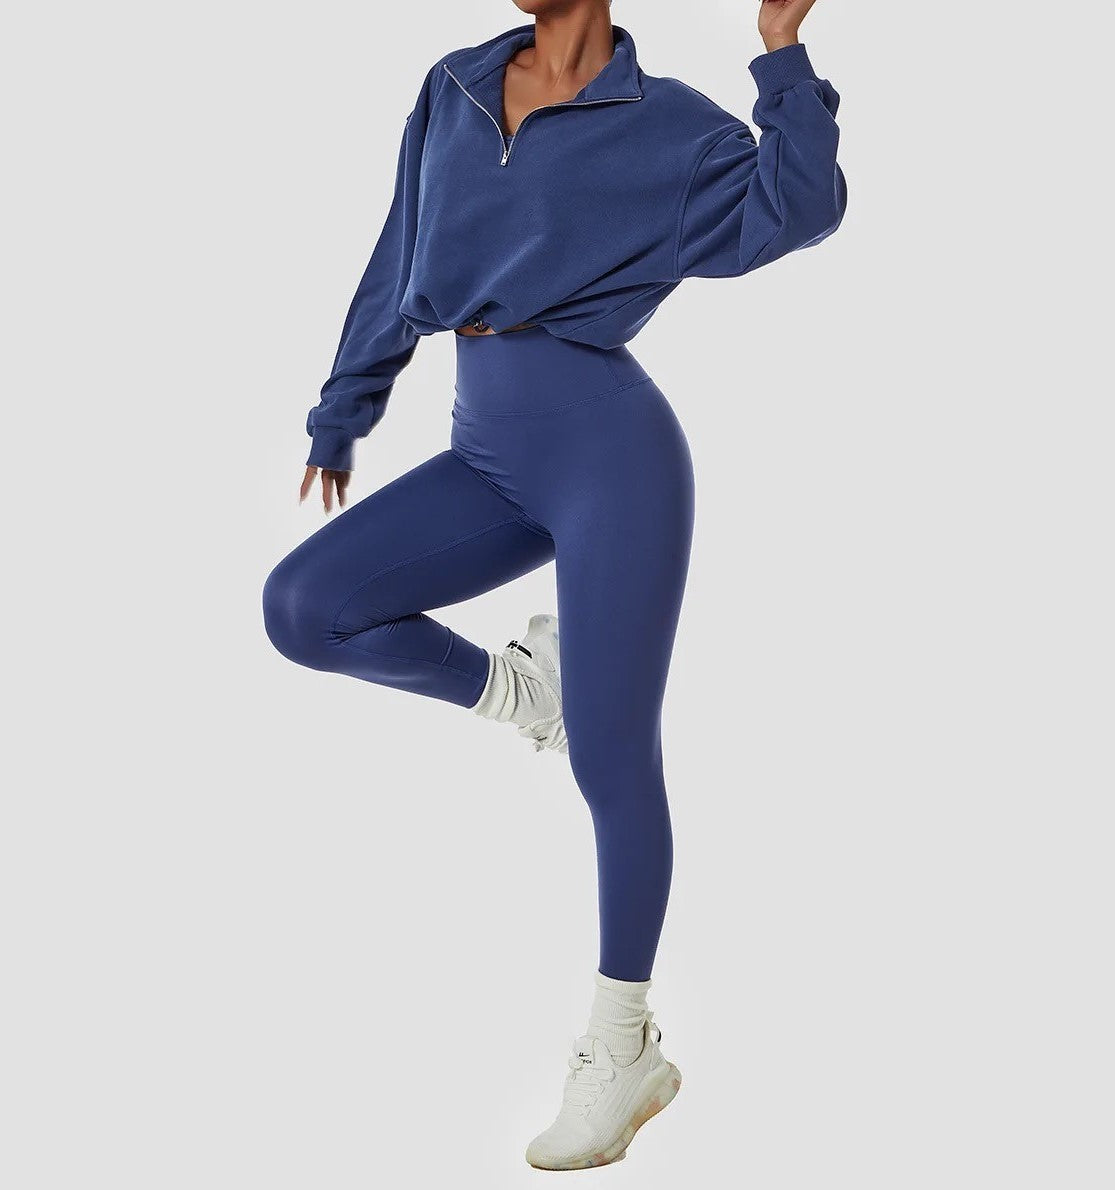 GymBabe Three Piece Set in Dark Blue (Made with recycled material)